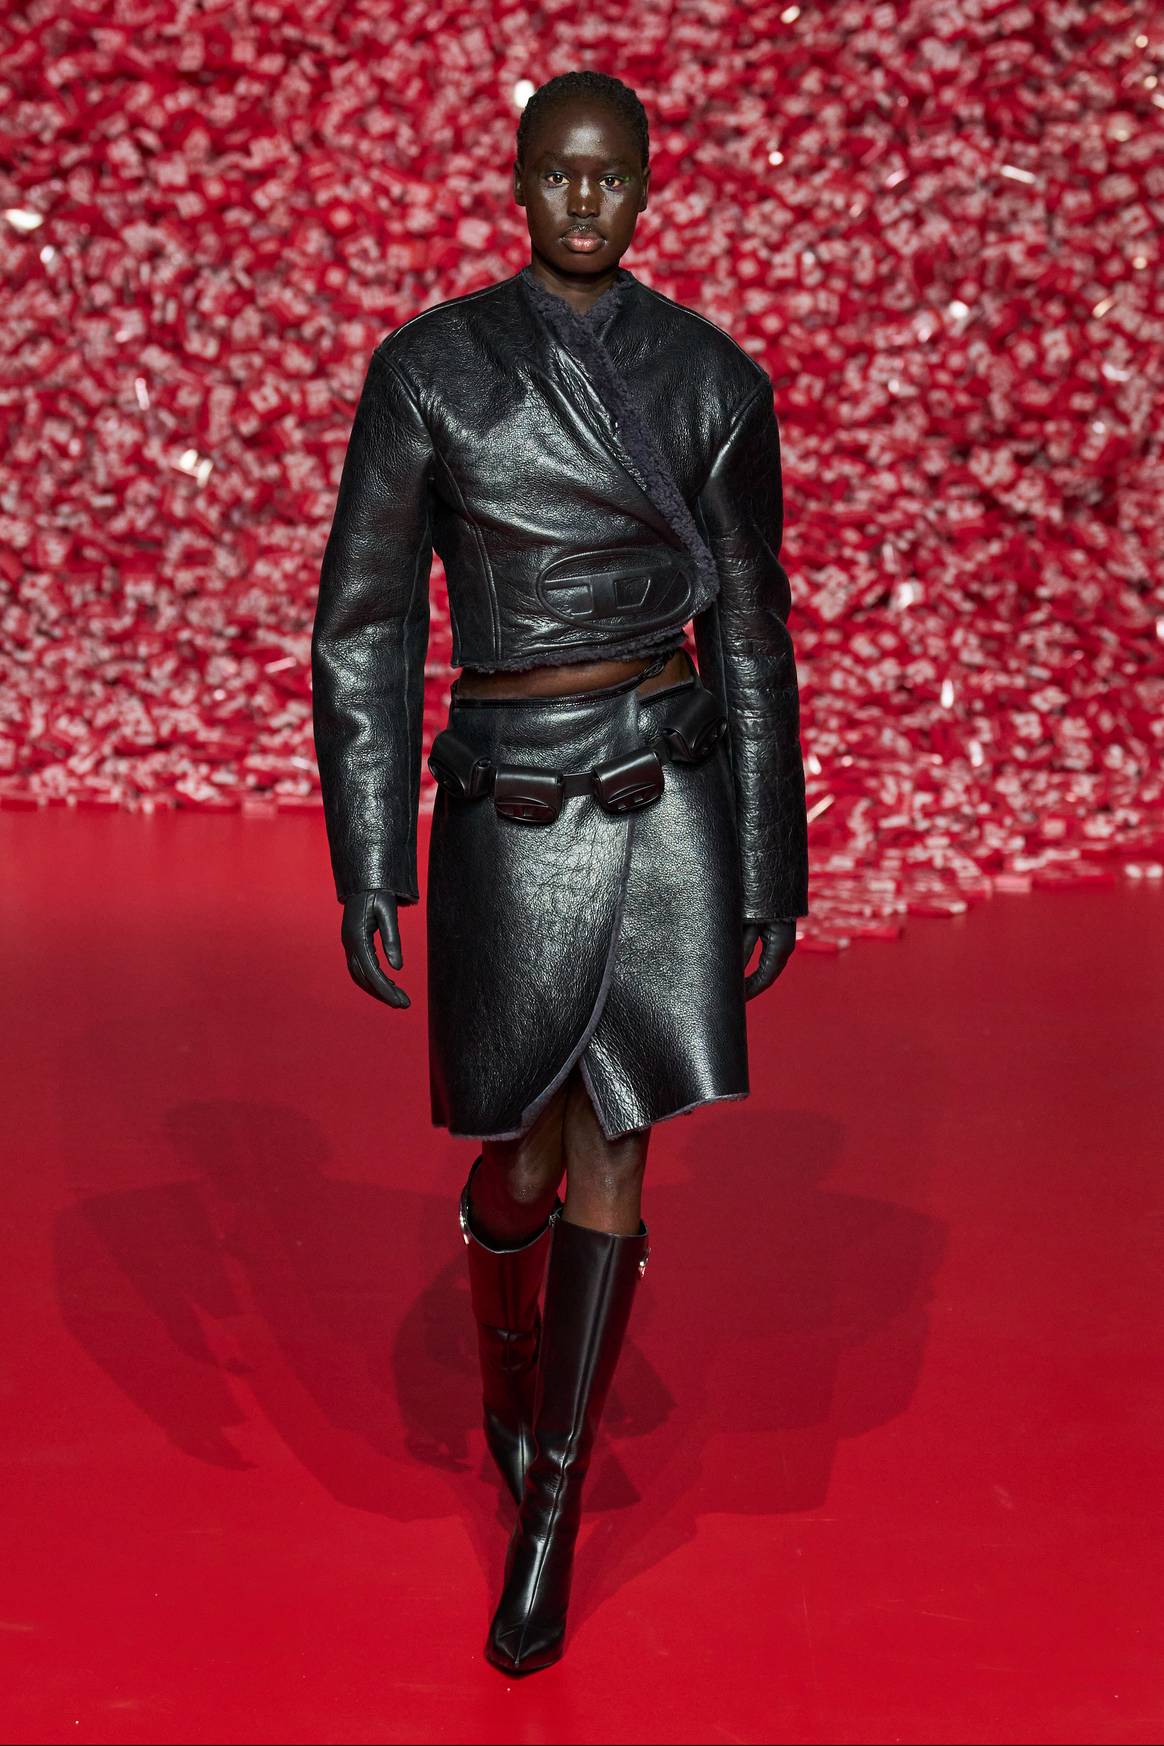 FW23 ready-to-wear runway trends: black leather, head-to-toe